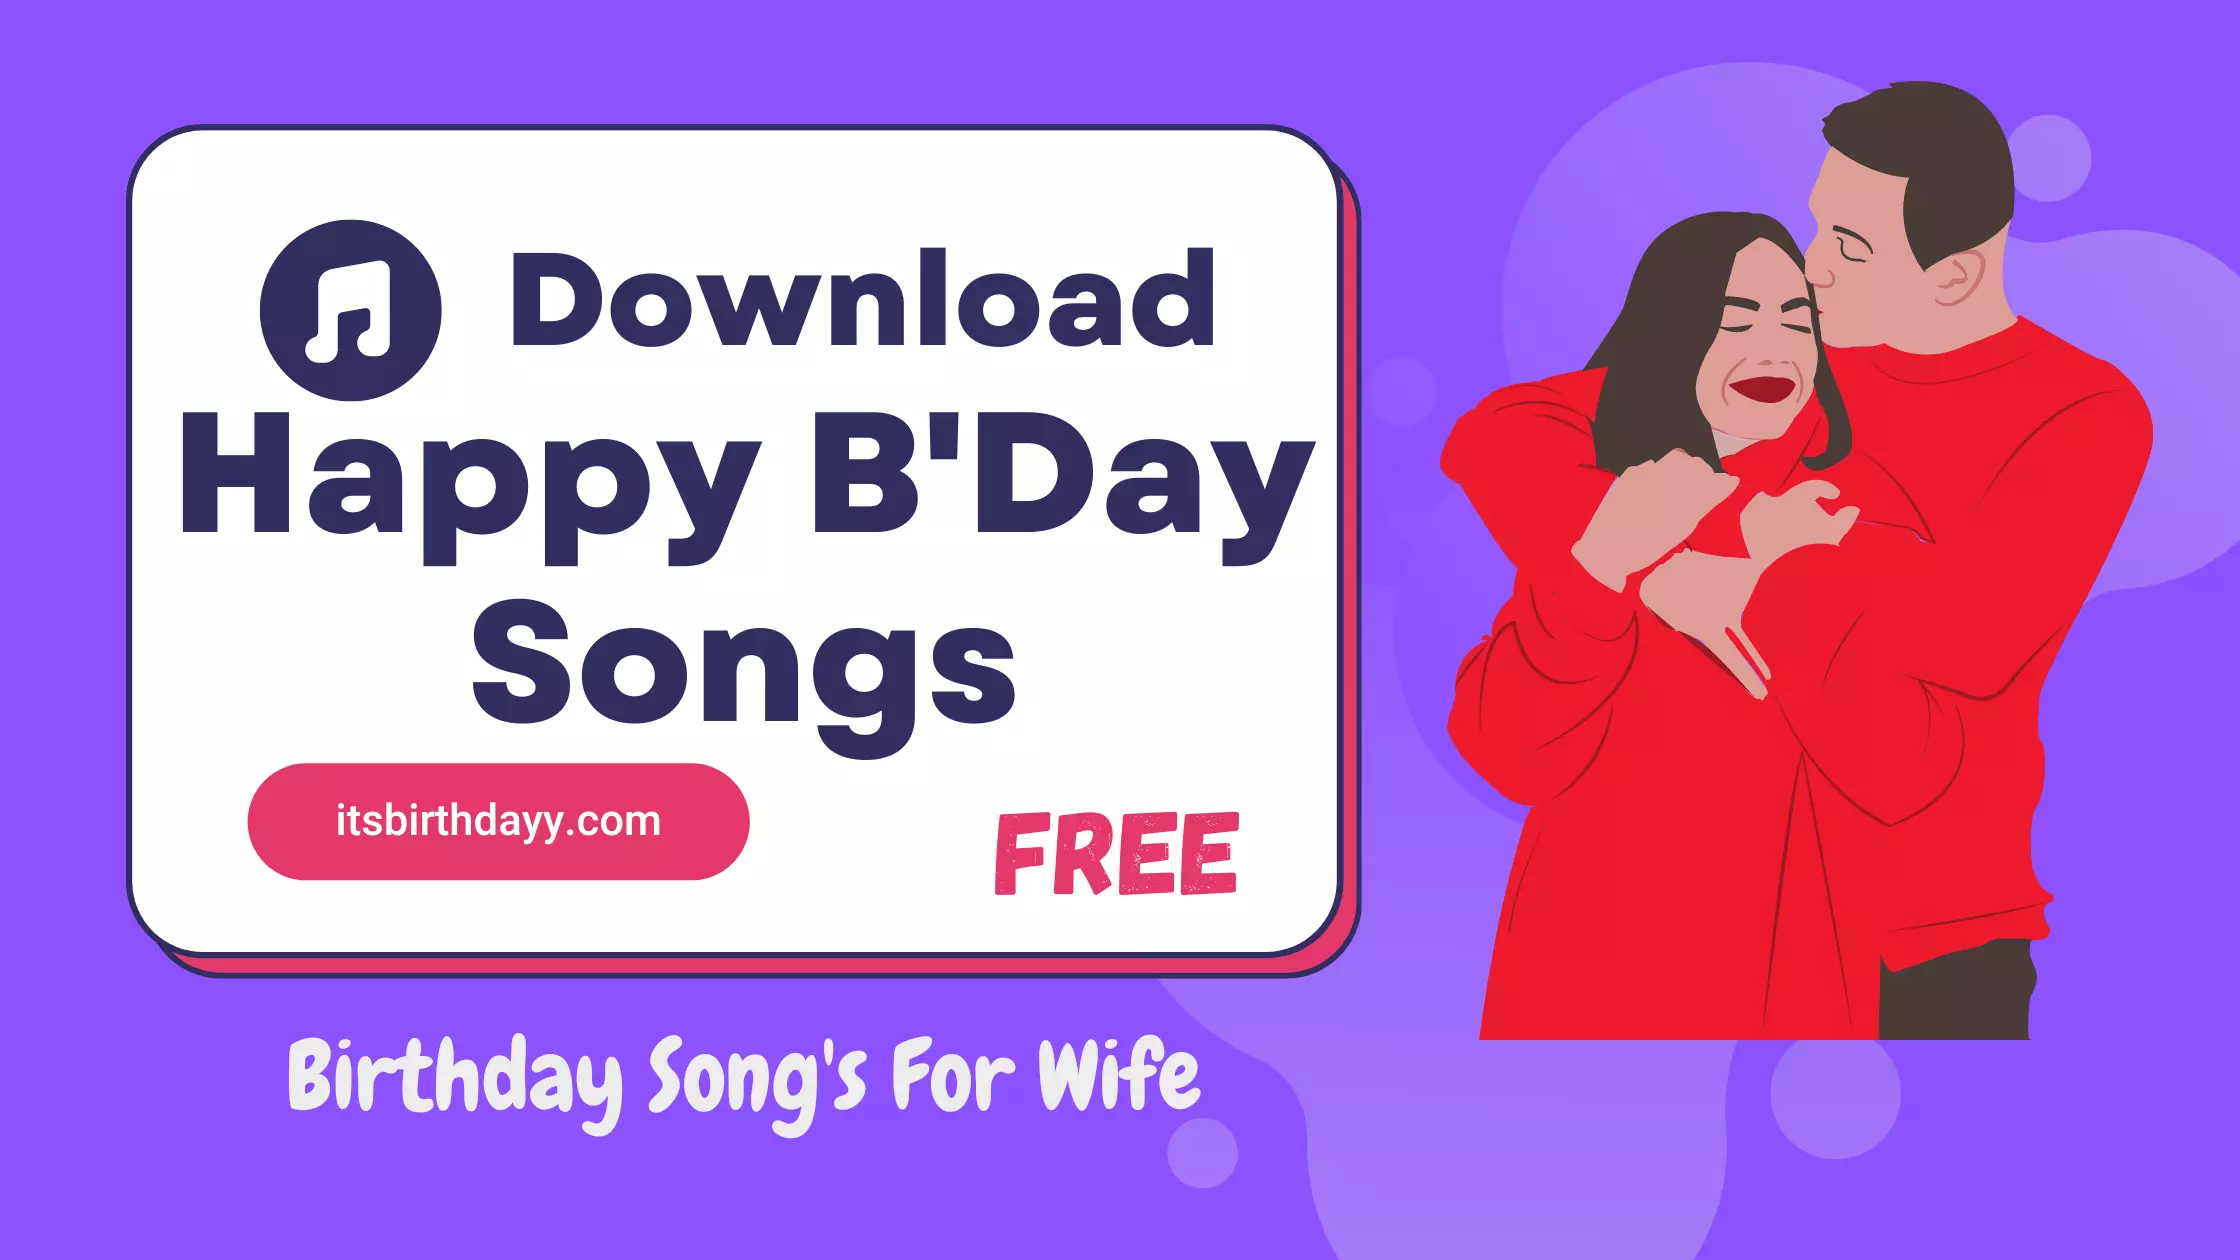 Happy Birthday Mp3 Songs for a wife